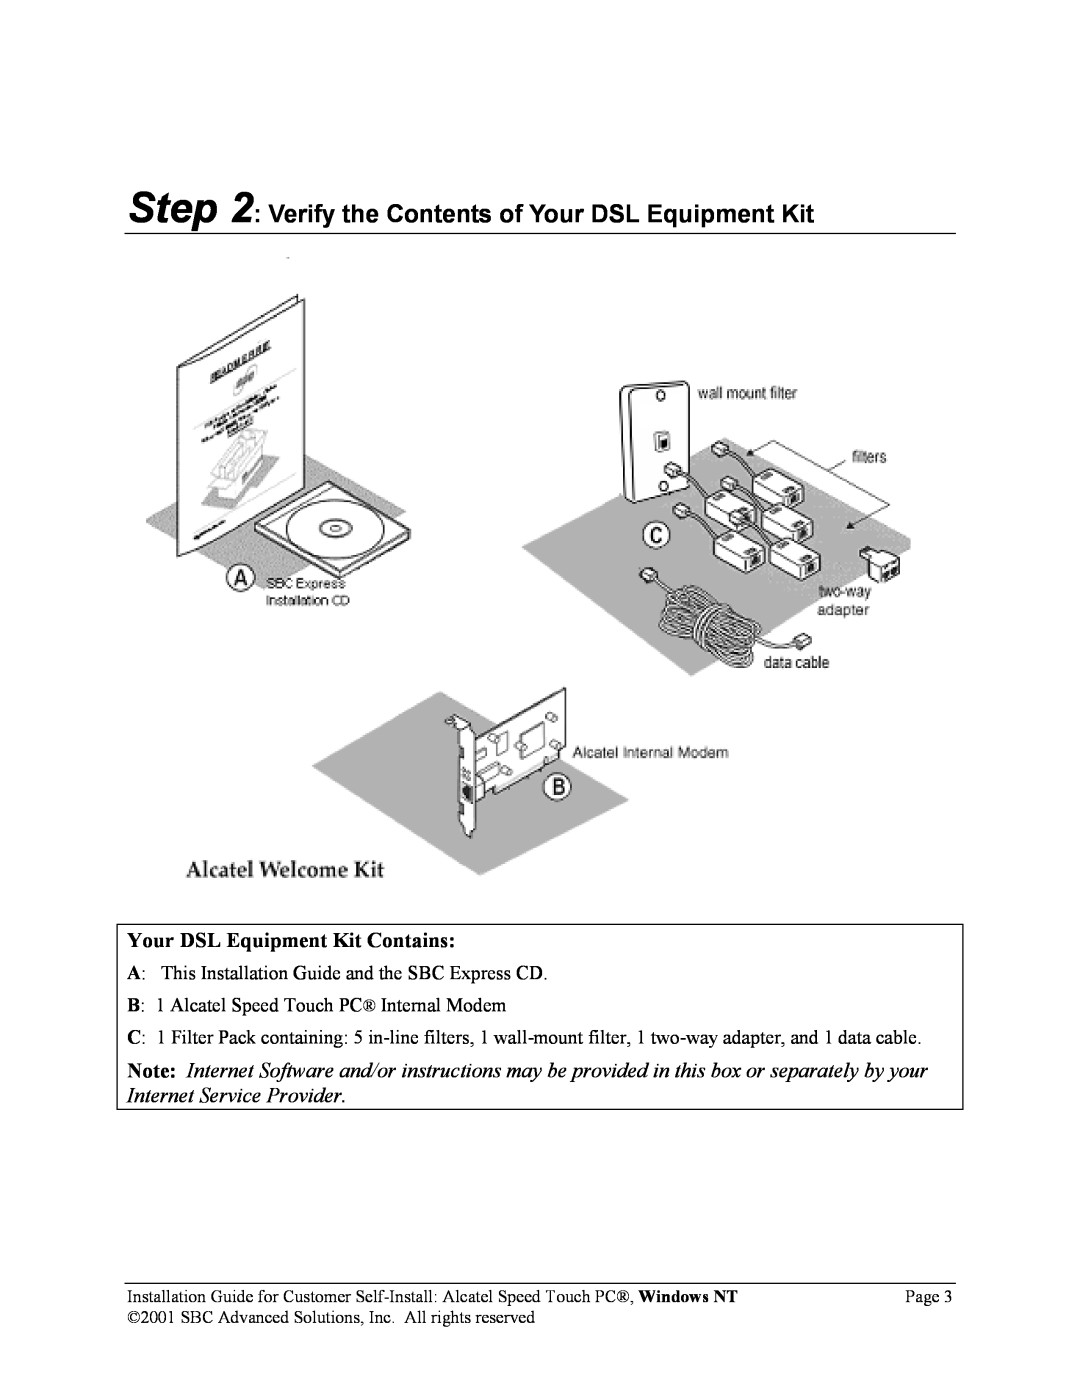 SBC comm PCNT02 Verify the Contents of Your DSL Equipment Kit, A This Installation Guide and the SBC Express CD, Page 